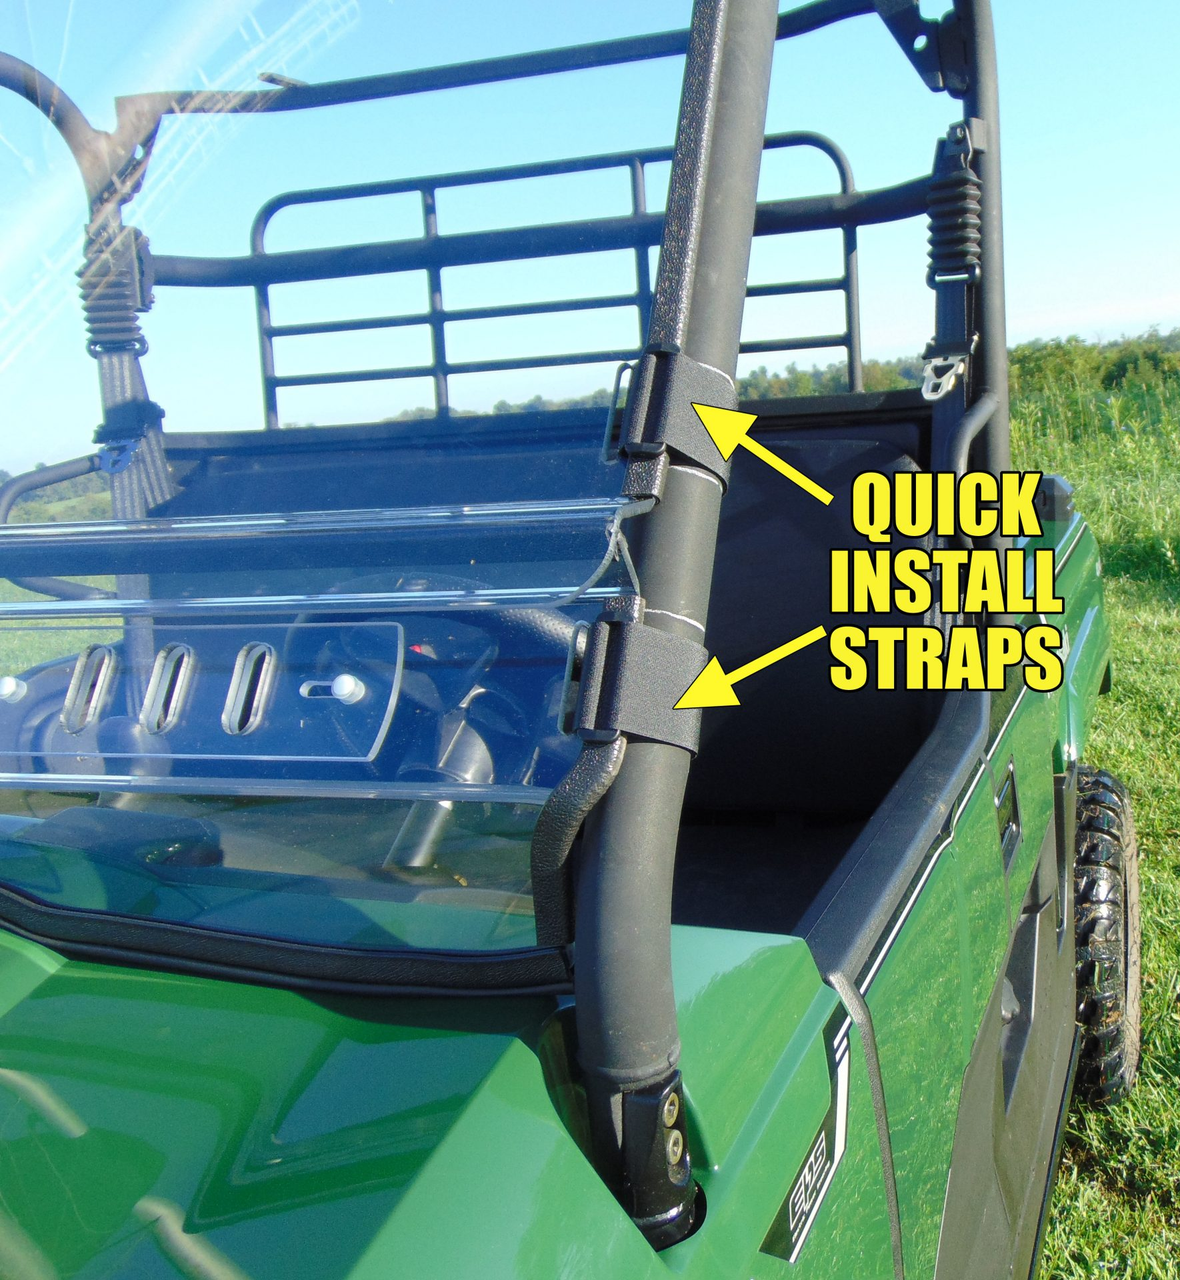 3 Star Kawasaki Mule Pro FXT DXT two piece polycarbonate windshield with optional scratch resistance and quick install straps